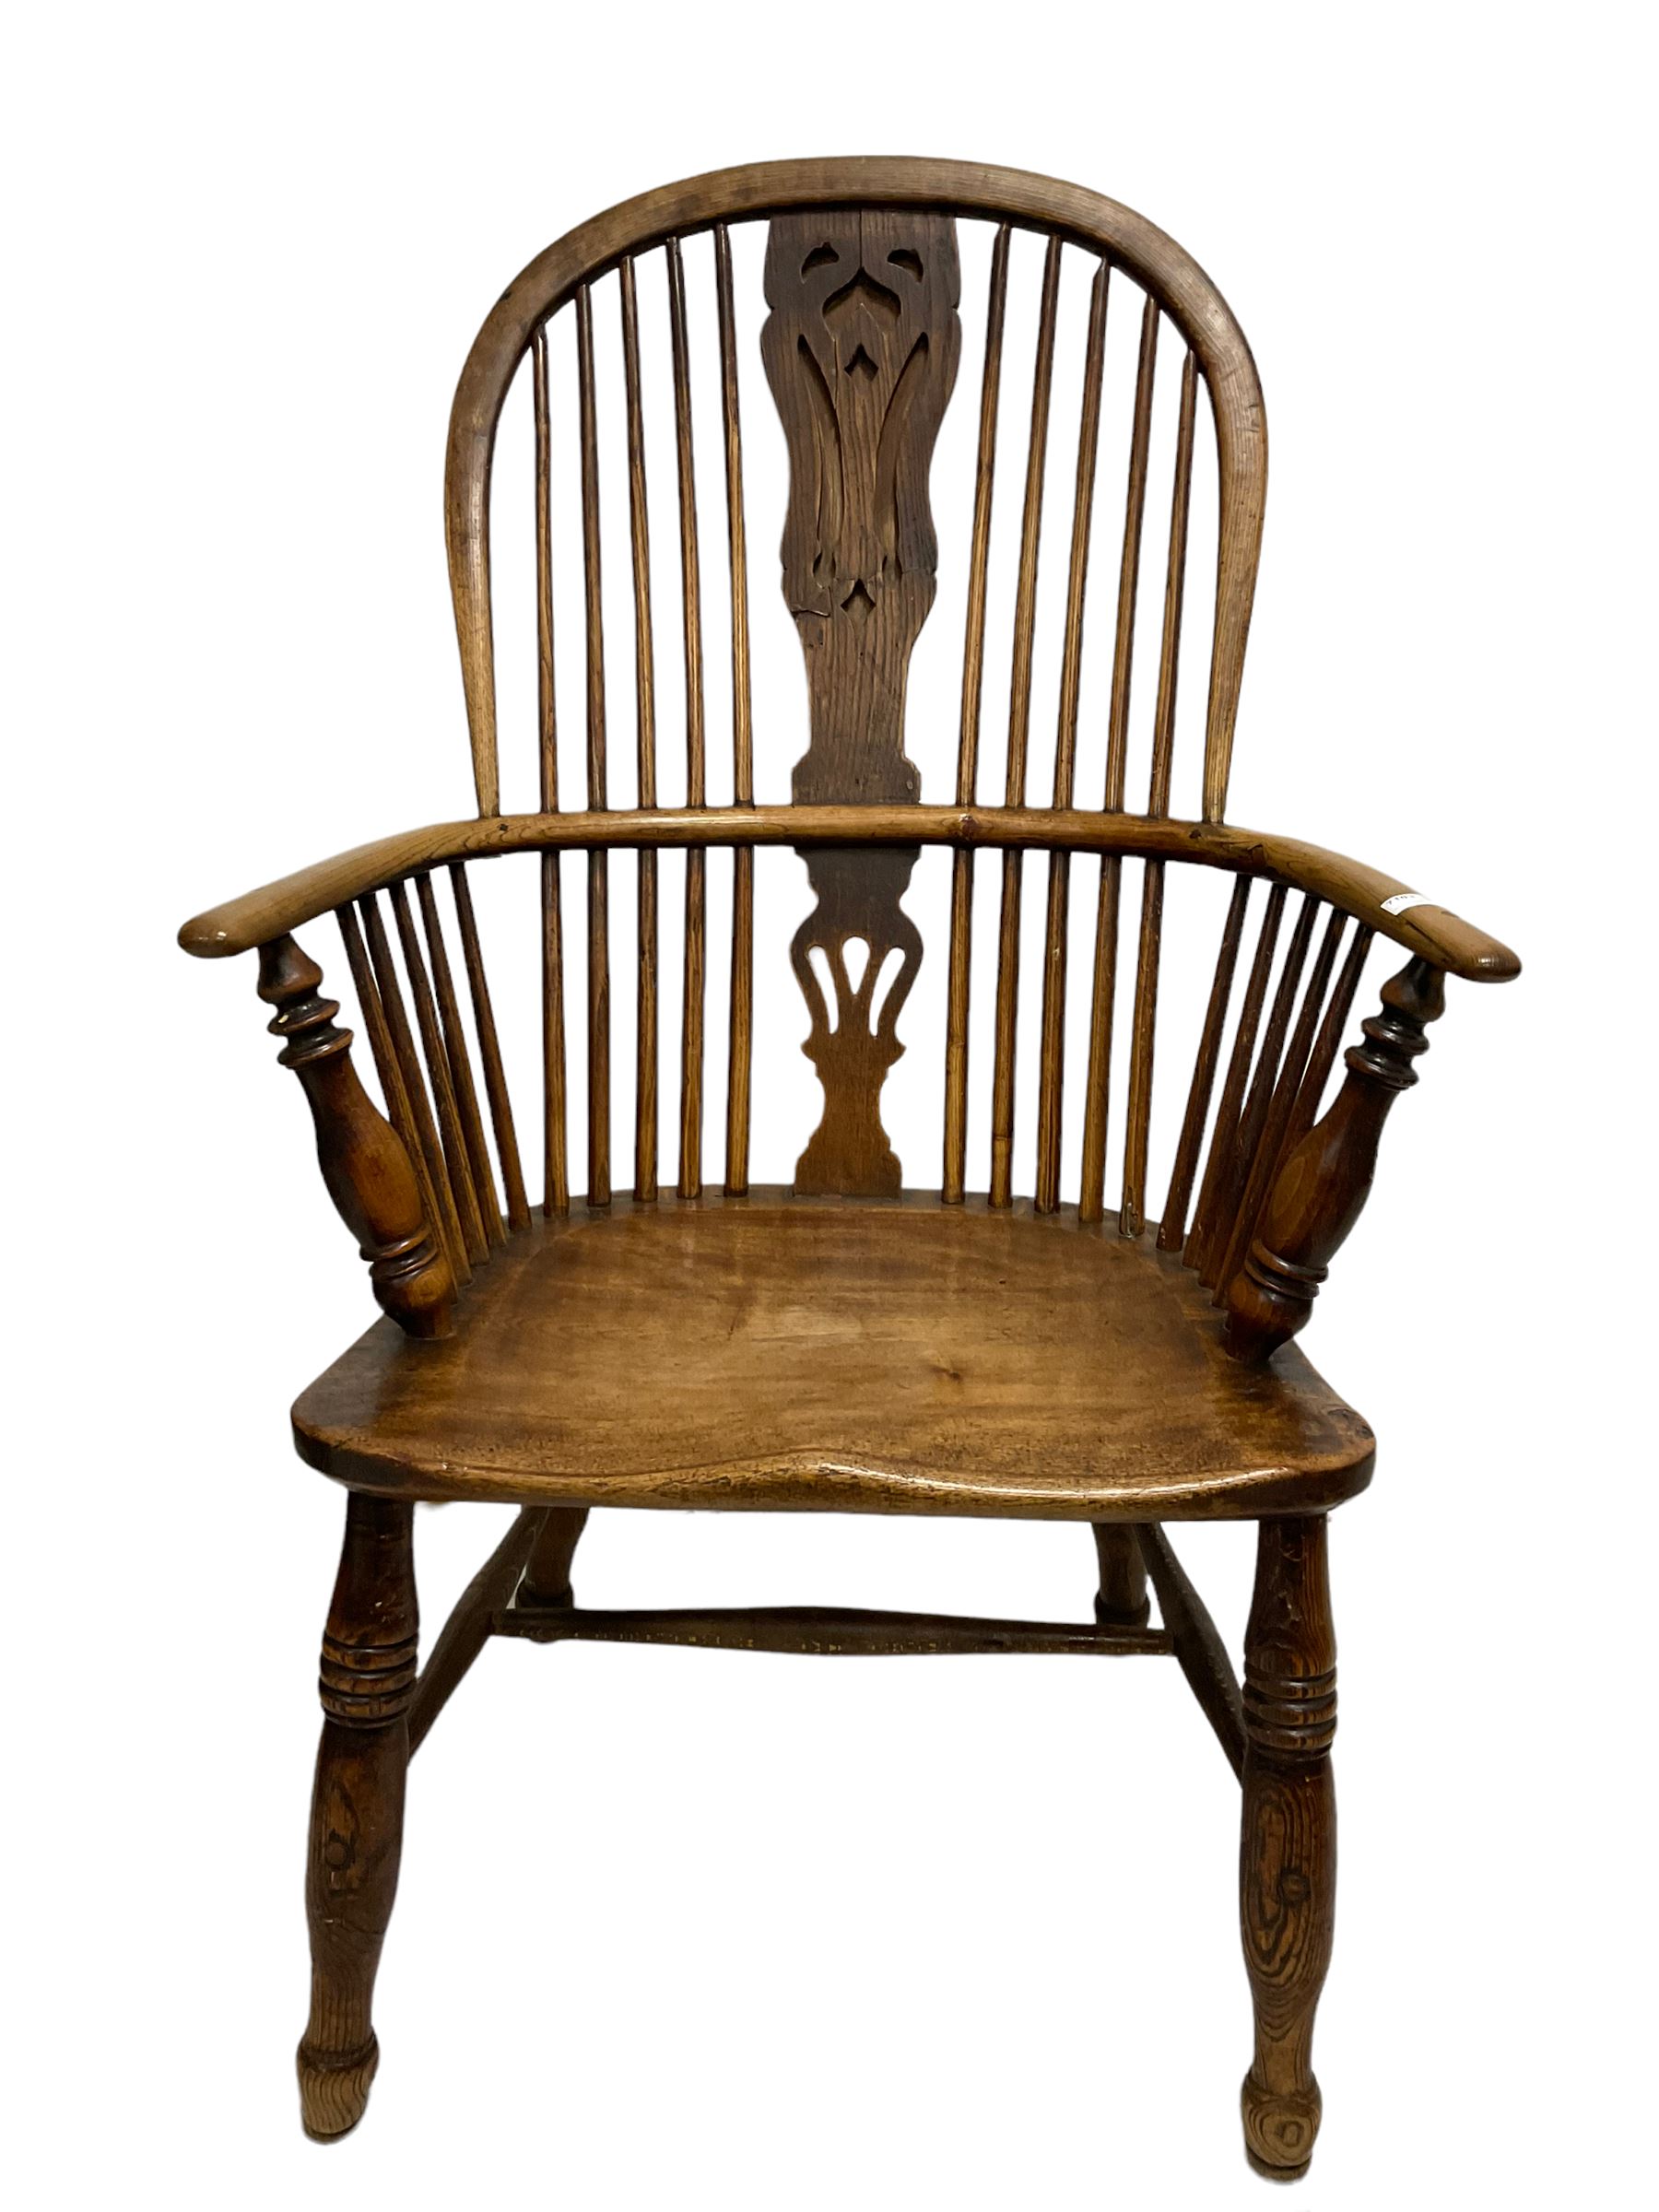 Early 19th century Windsor armchair - Image 5 of 5